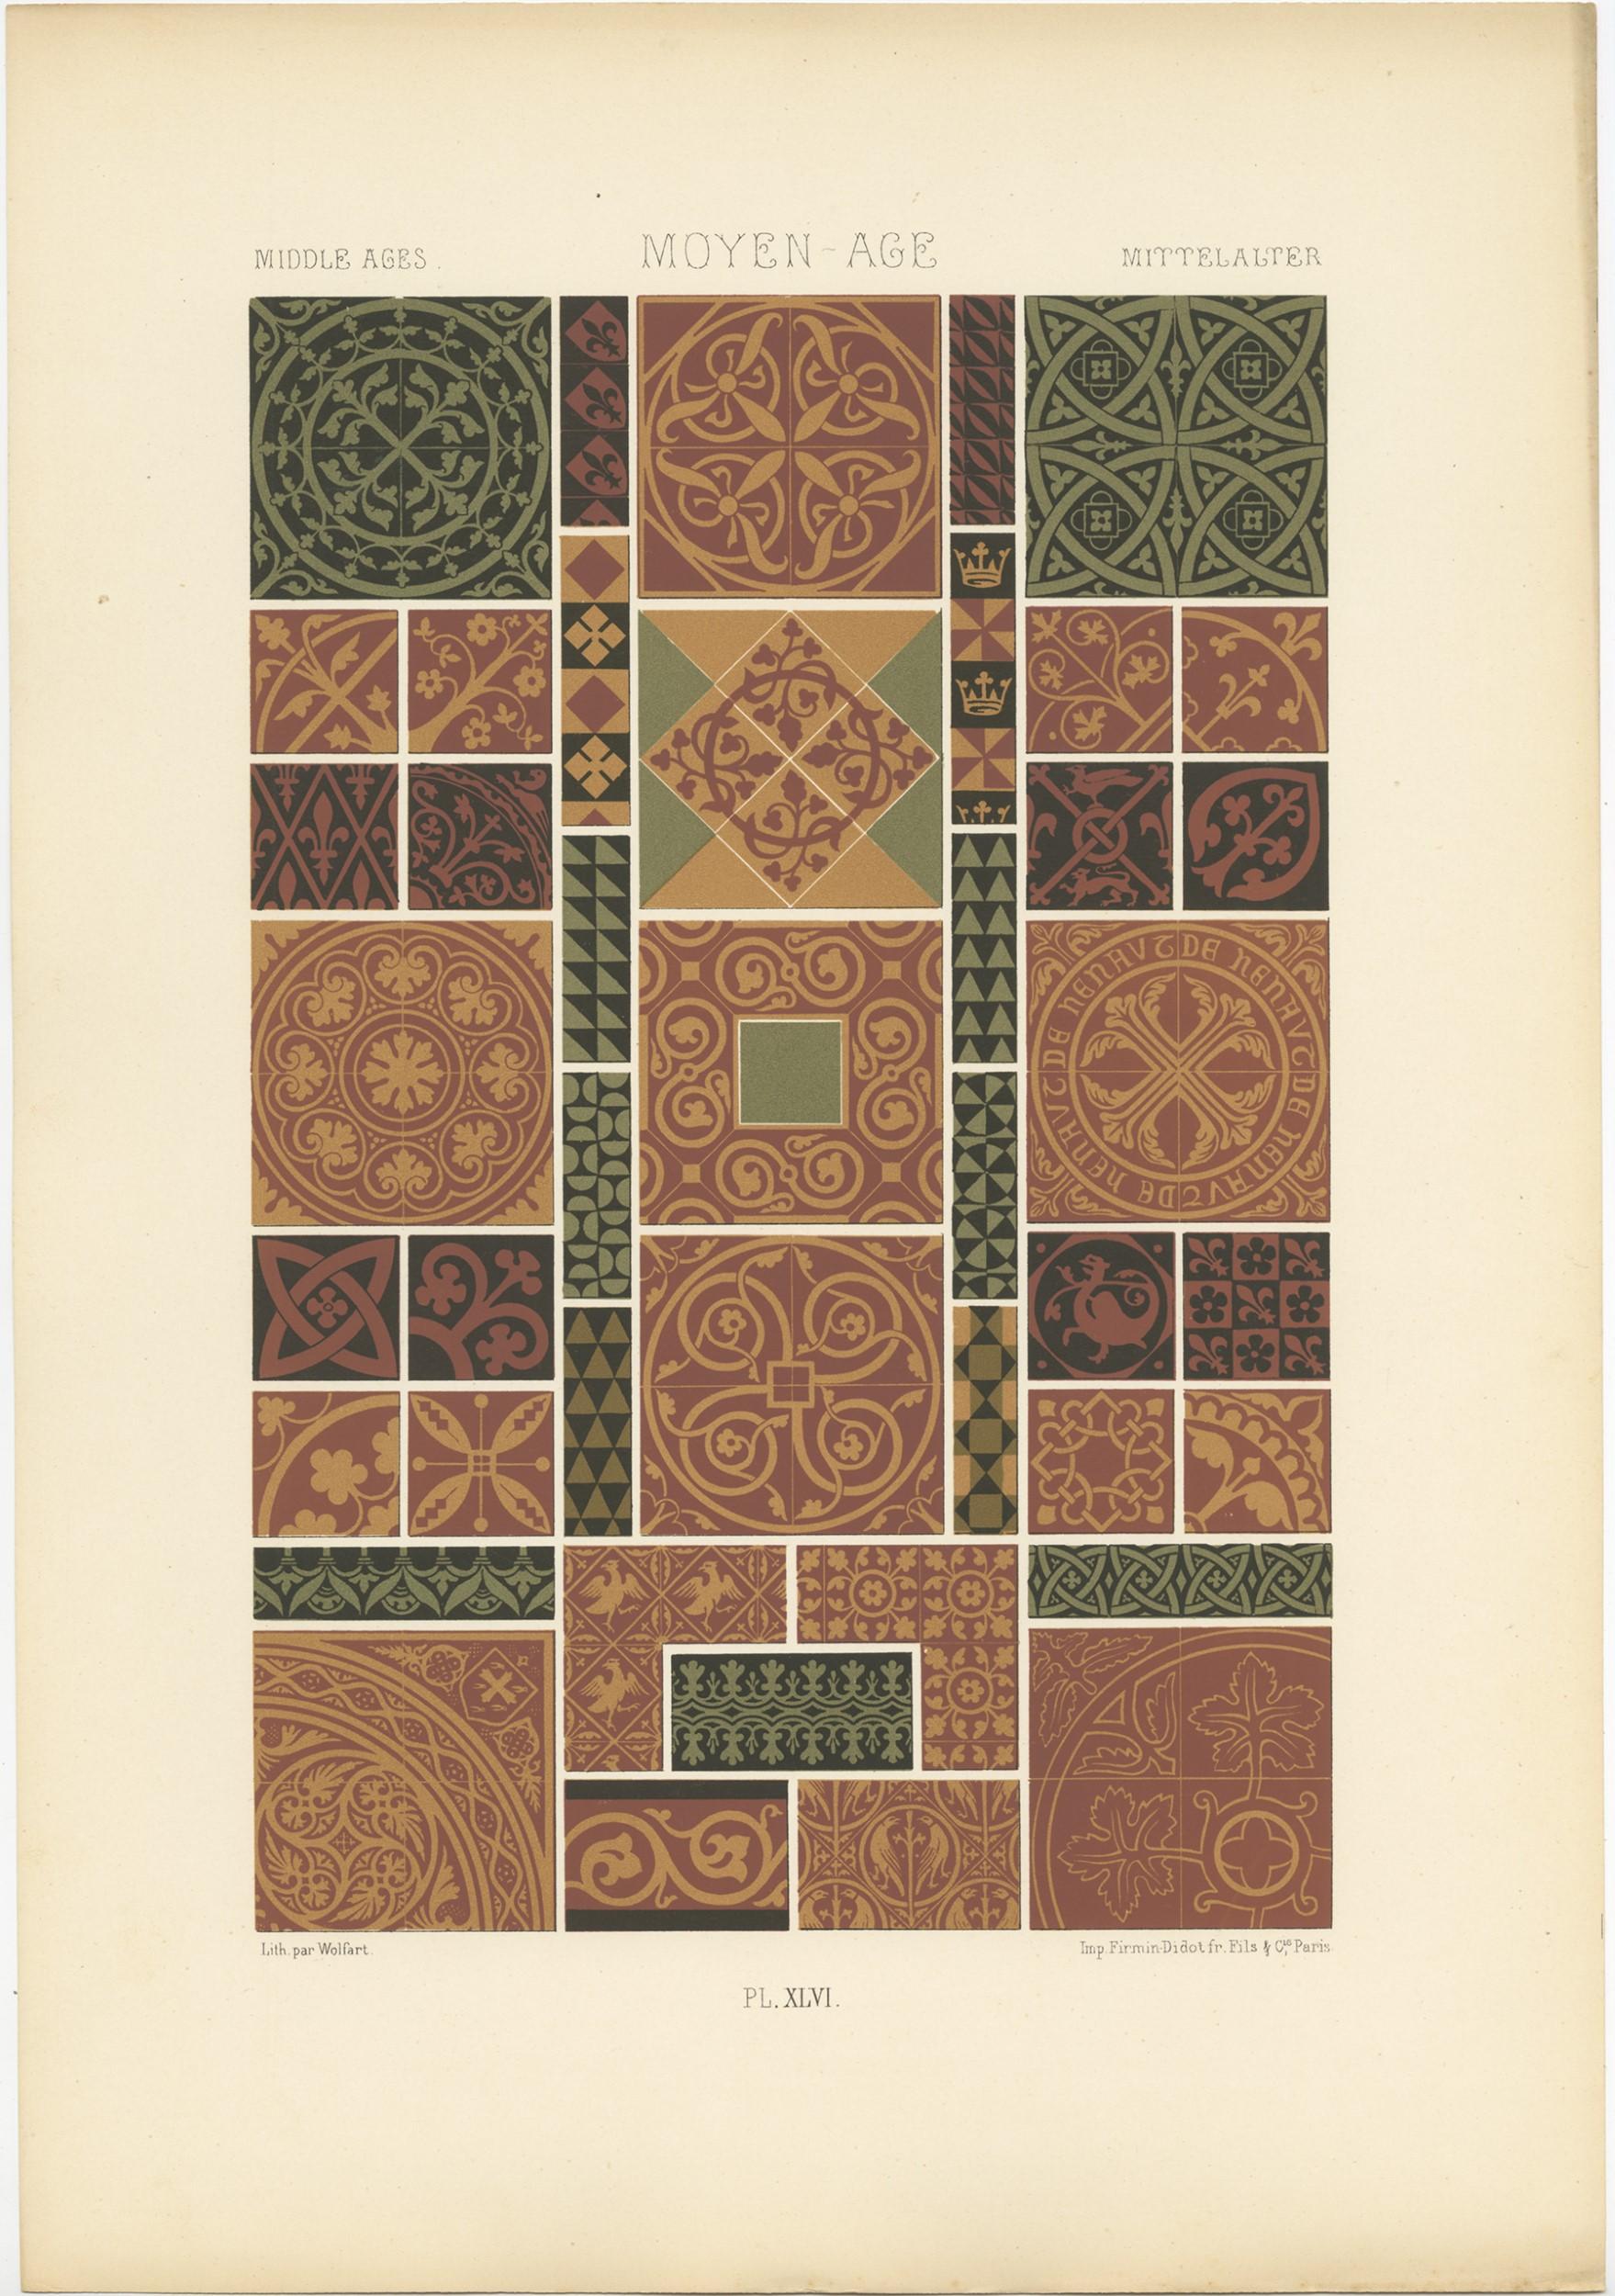 Antique print titled 'Middle Ages - Moyen Âge - Mittel Ages'. Chromolithograph of Middle Ages ornaments and decorative arts. This print originates from 'l'Ornement Polychrome' by Auguste Racinet. Published circa 1890.